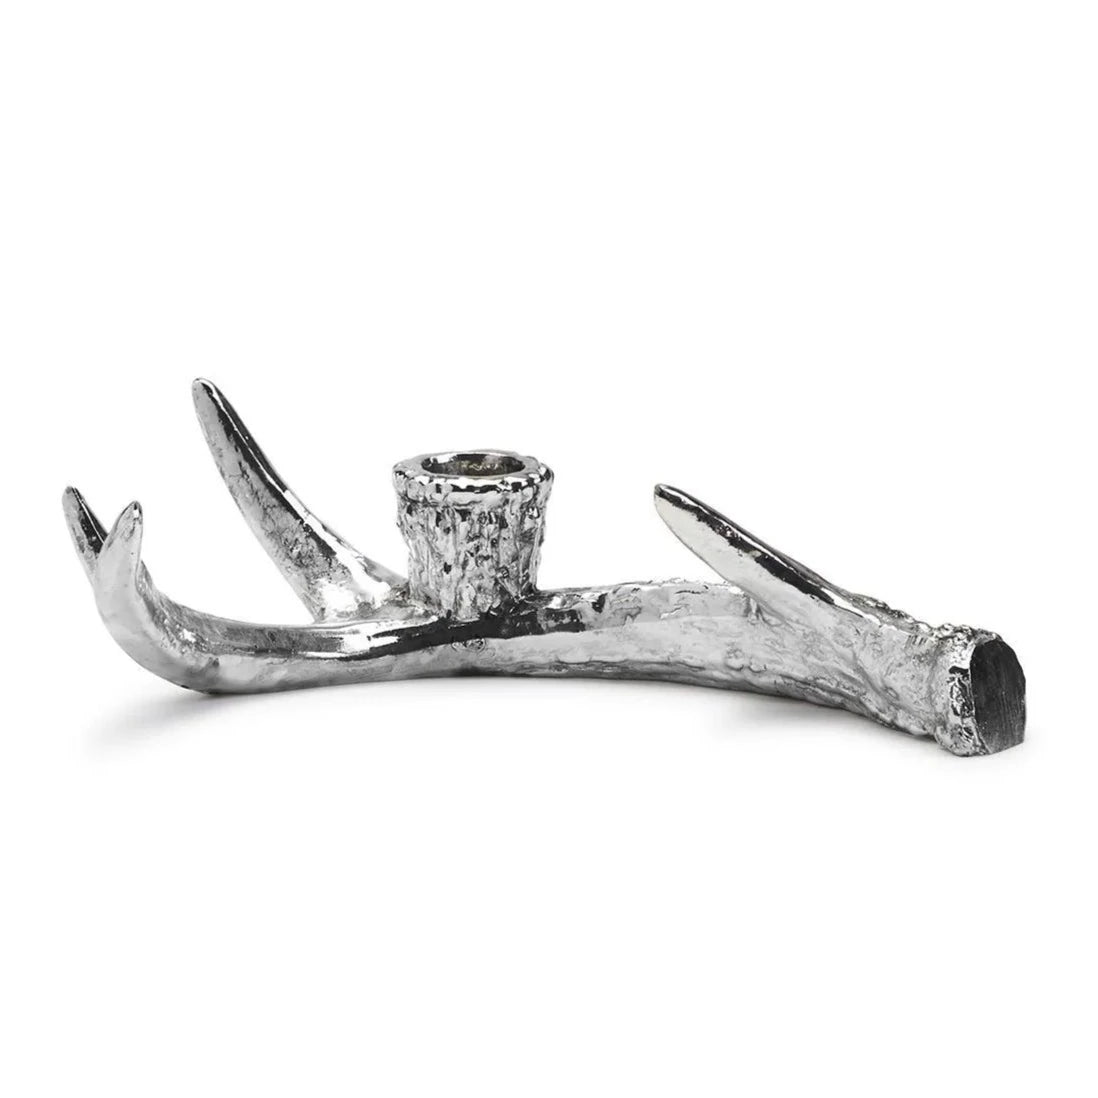 Silver Antler Taper Candleholder-Home/Giftware-Kevin's Fine Outdoor Gear & Apparel